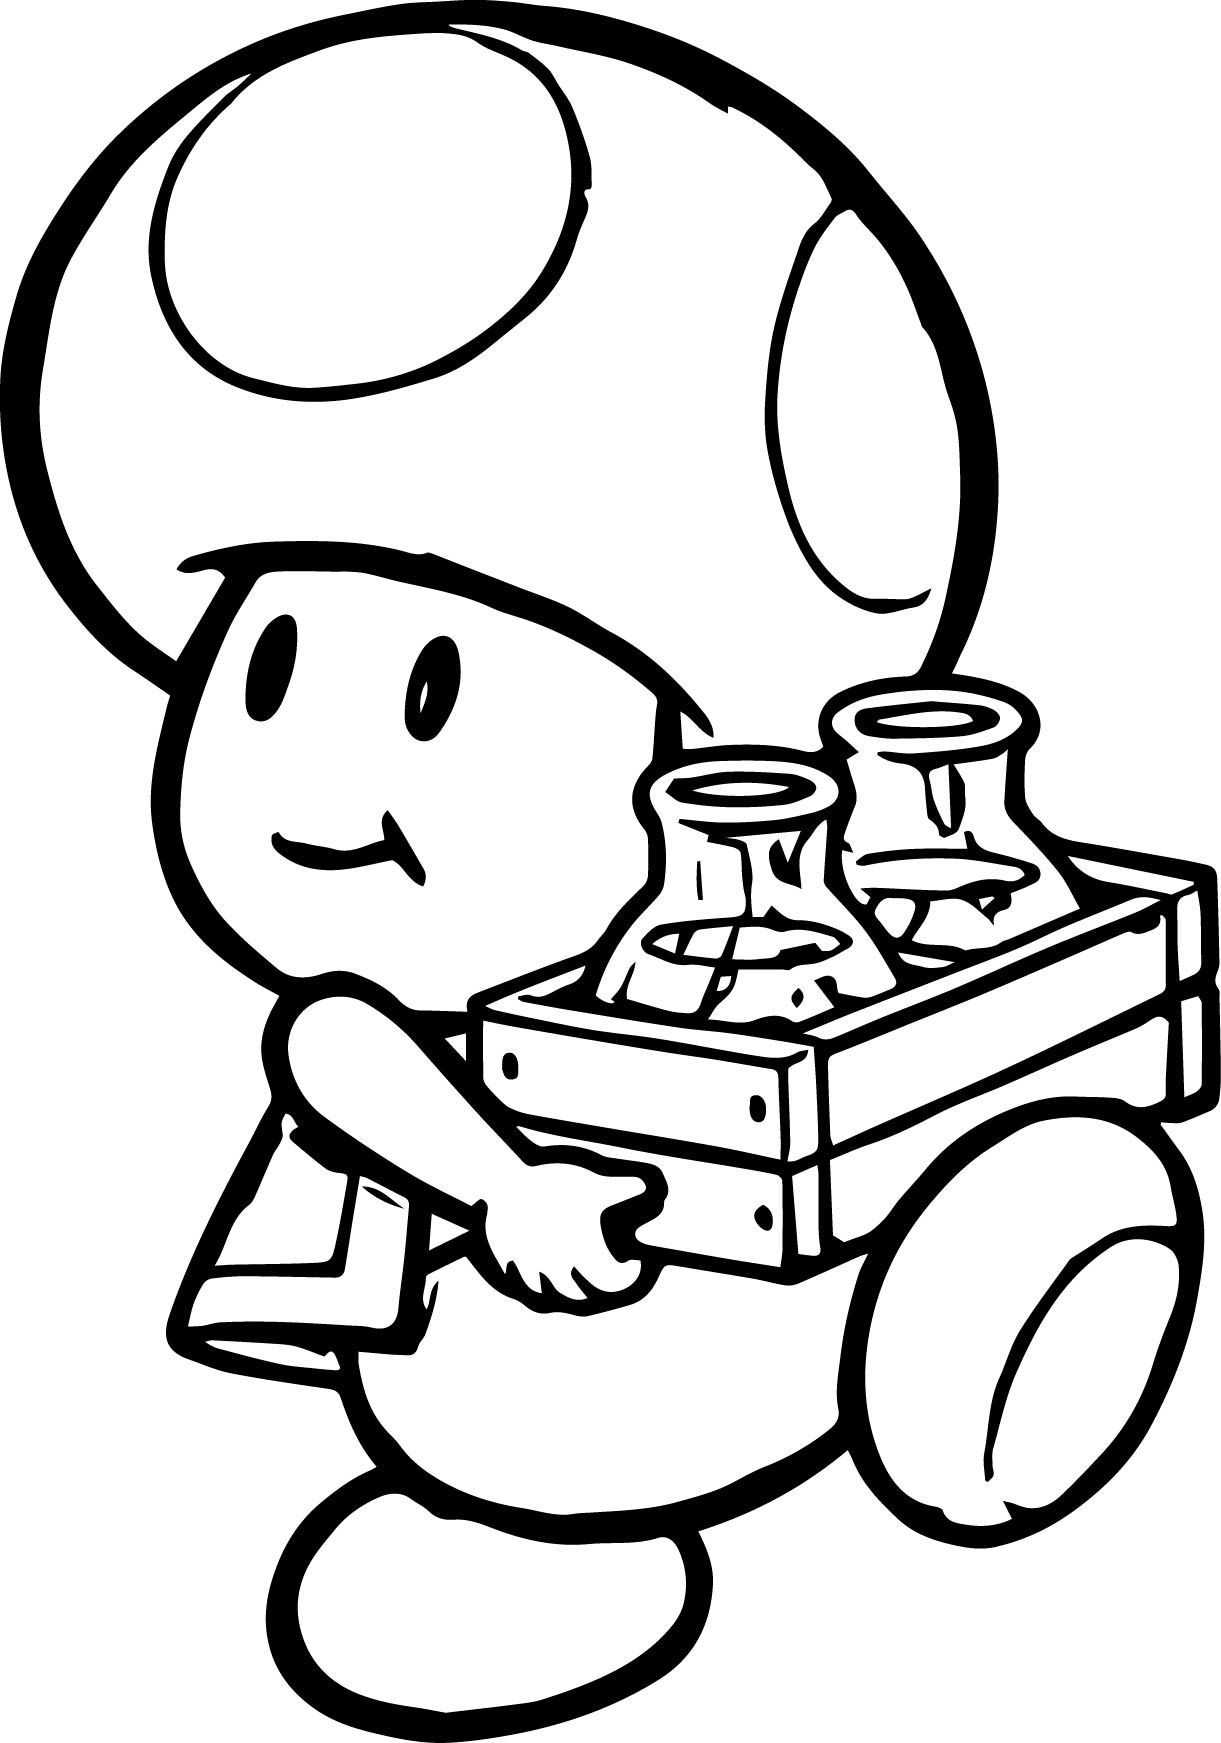 coloring : Nintendo Coloring Pages Nintendo Printable Coloring Pages‚ Nintendo  Switch Games Coloring Pages‚ Nintendo Switch Printable Coloring Page along  with colorings